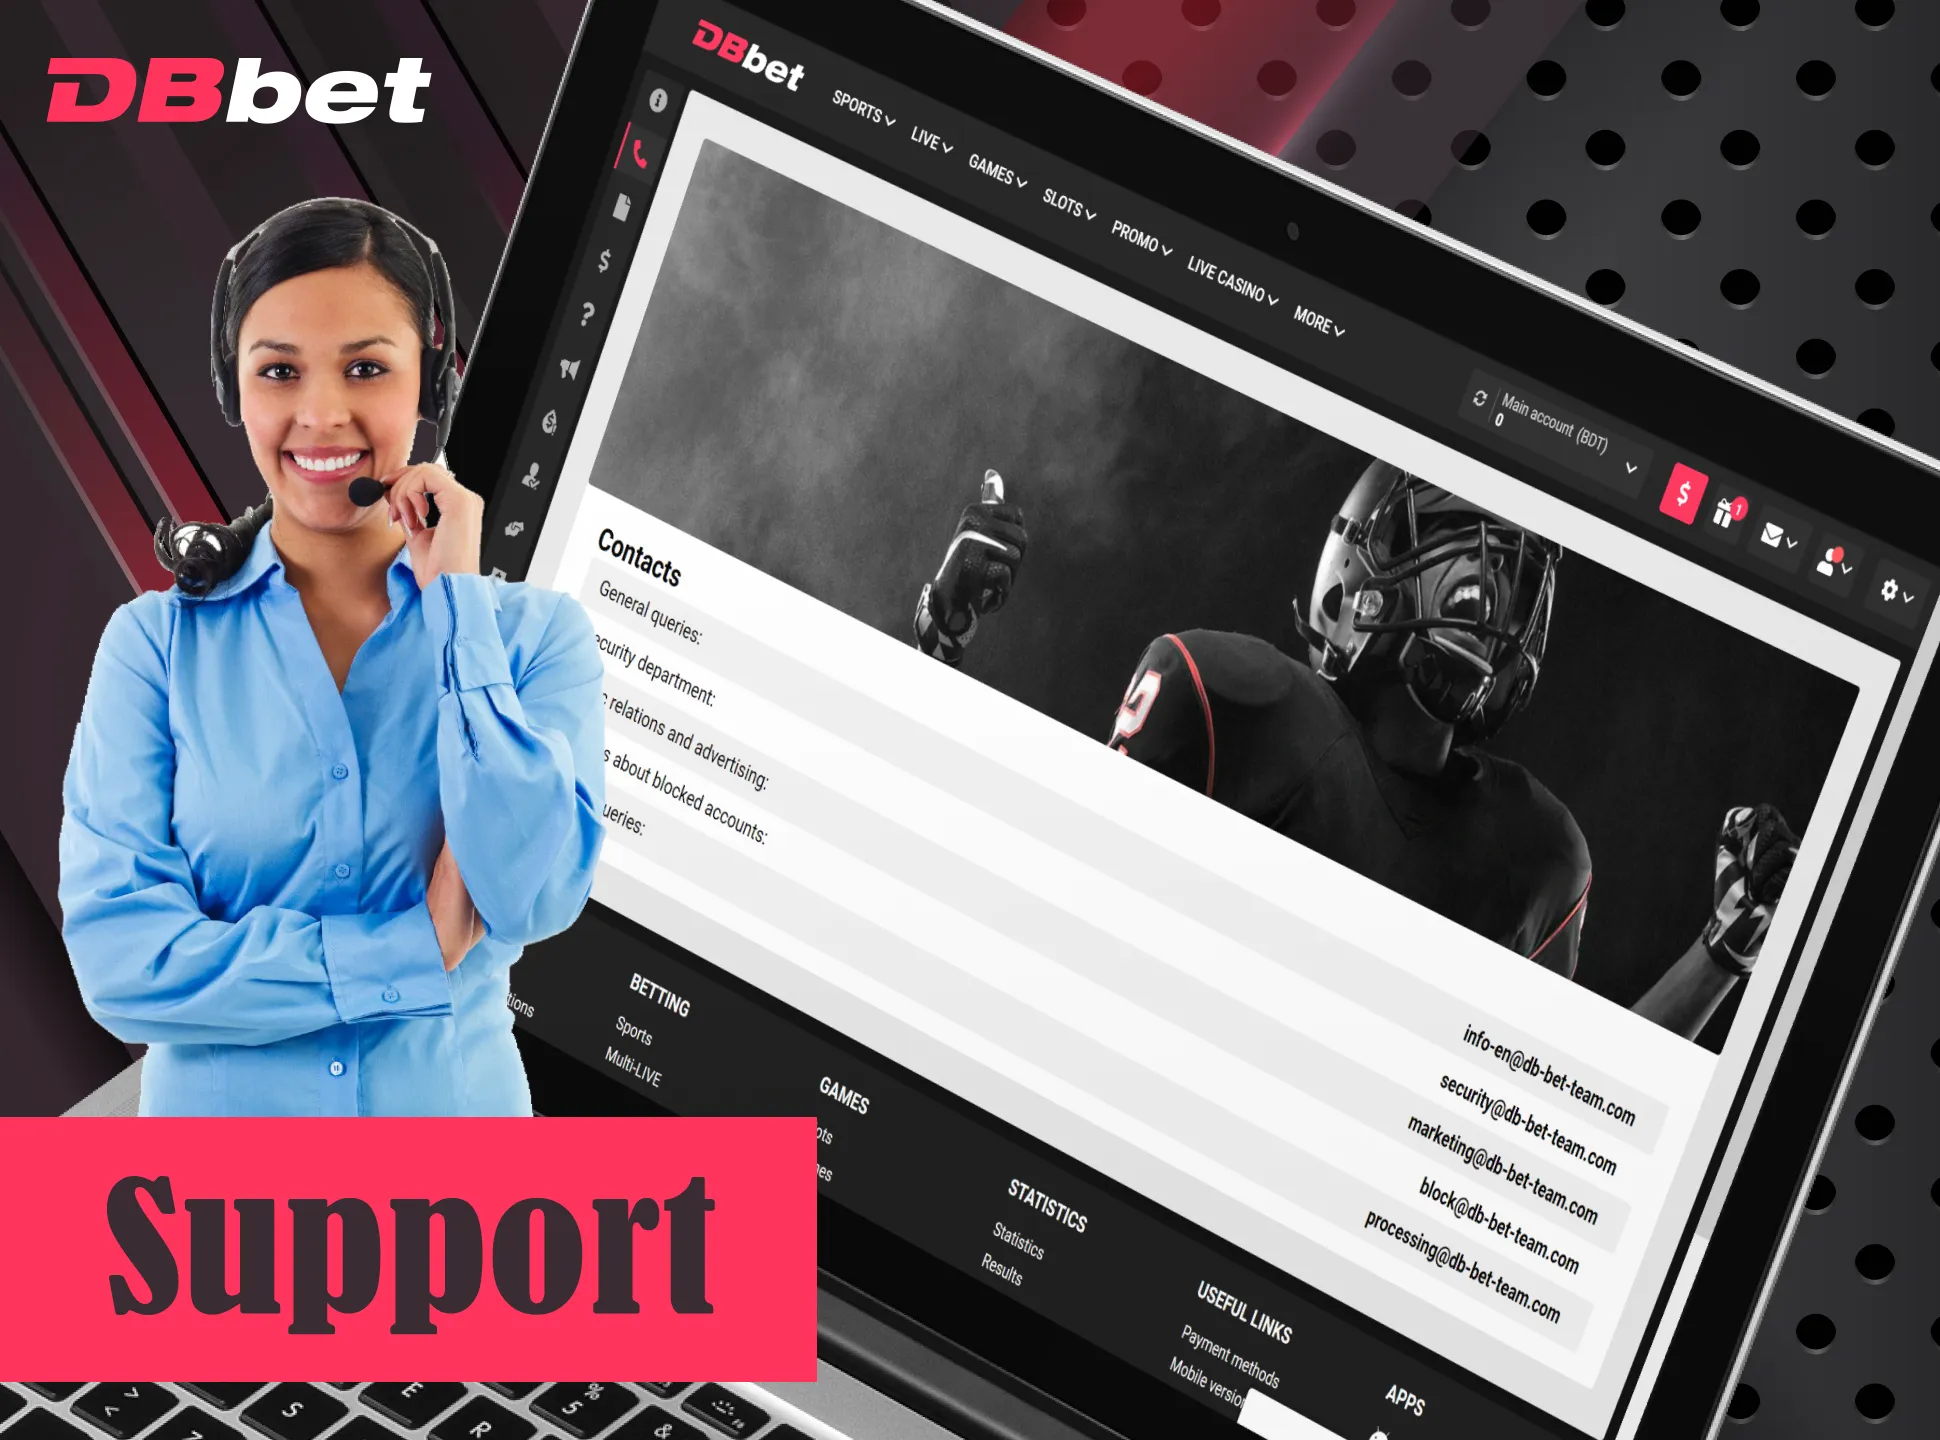 DBbet support can help you with any problem.